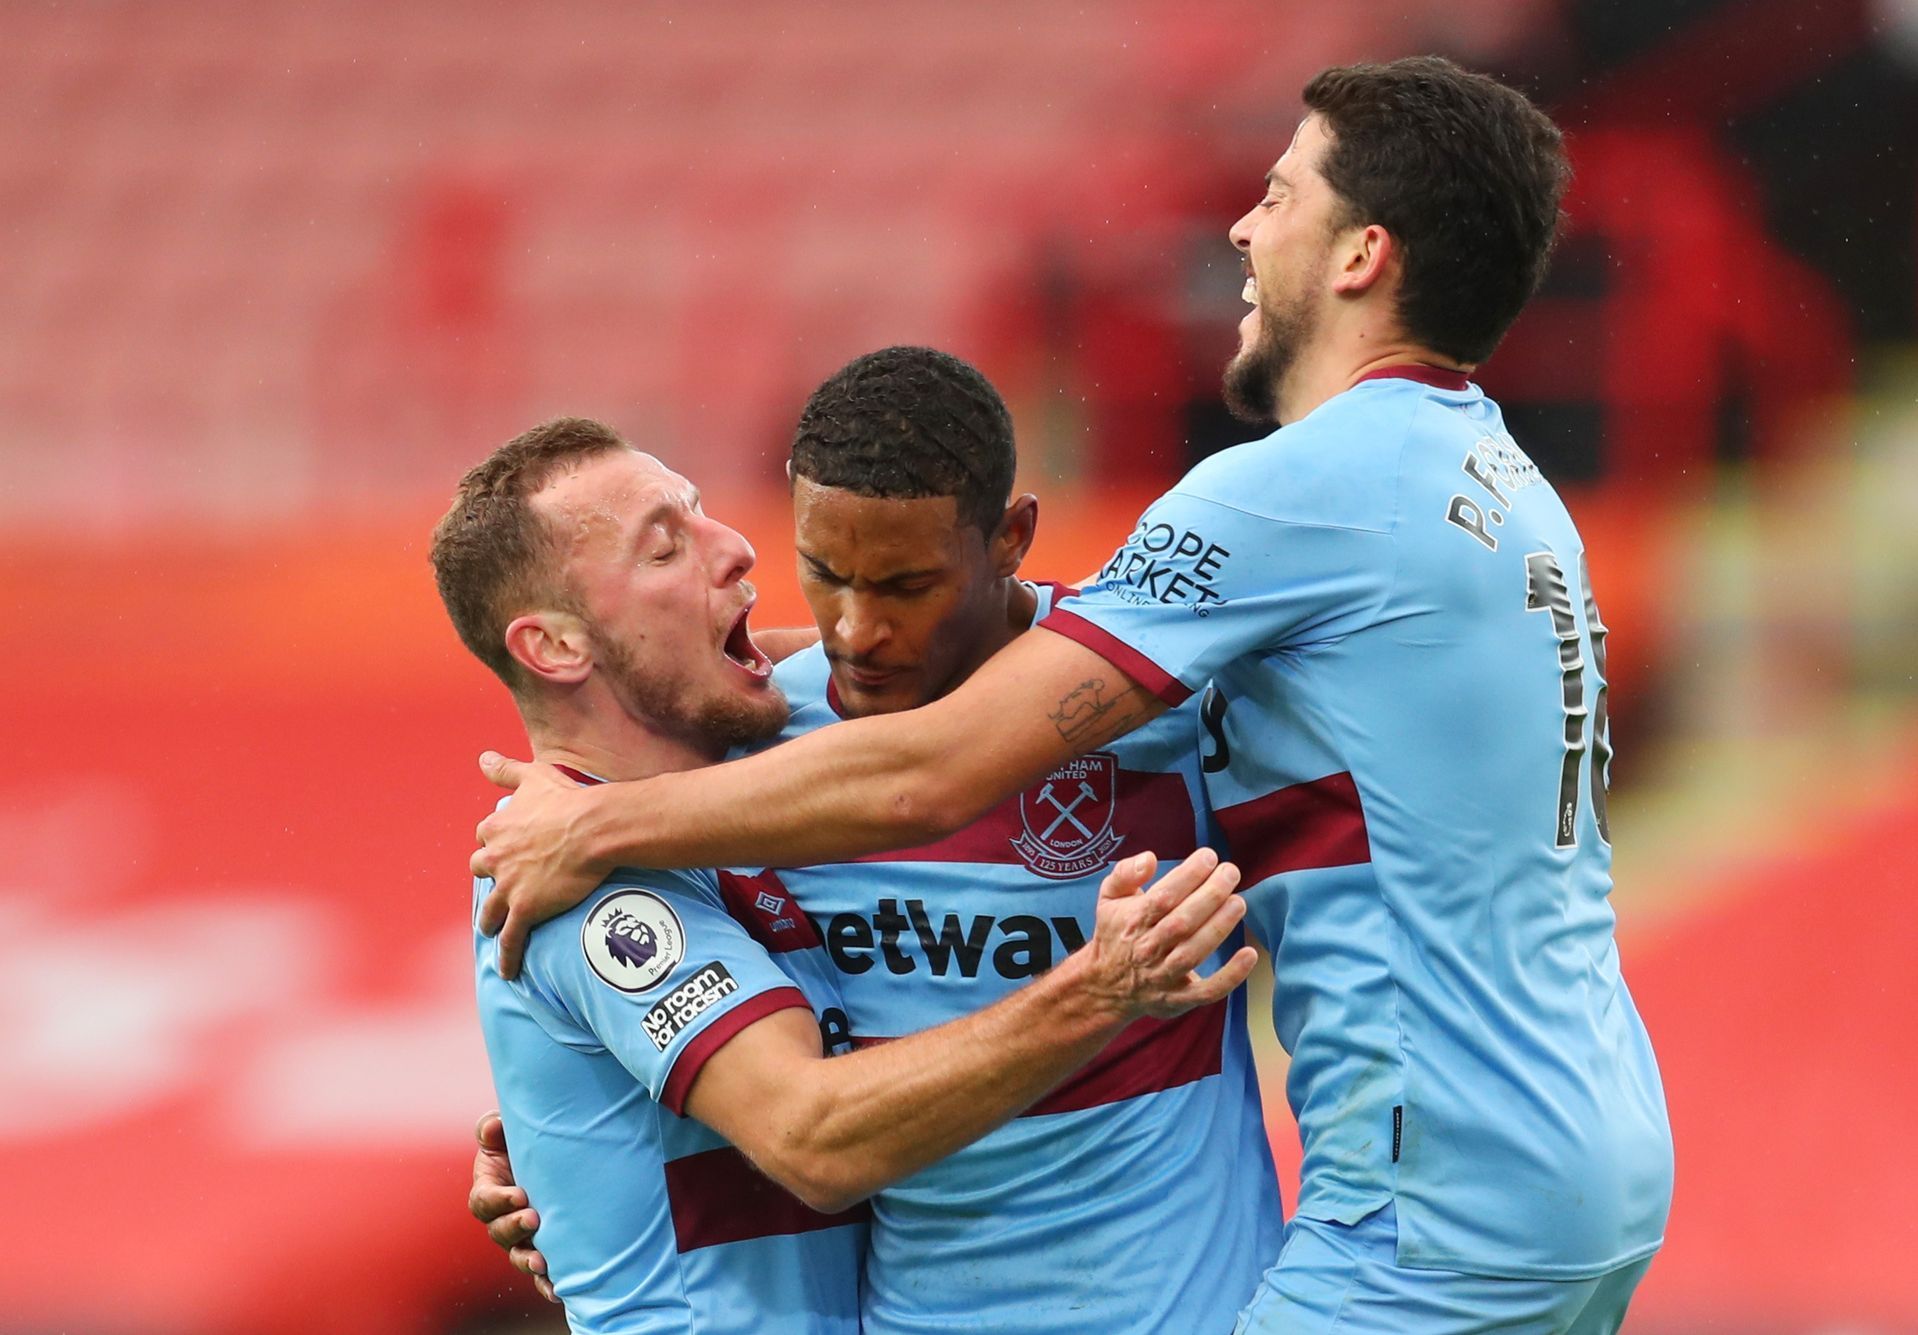 Sheffield United - West Ham United (Coufal, Haller, Fornals)